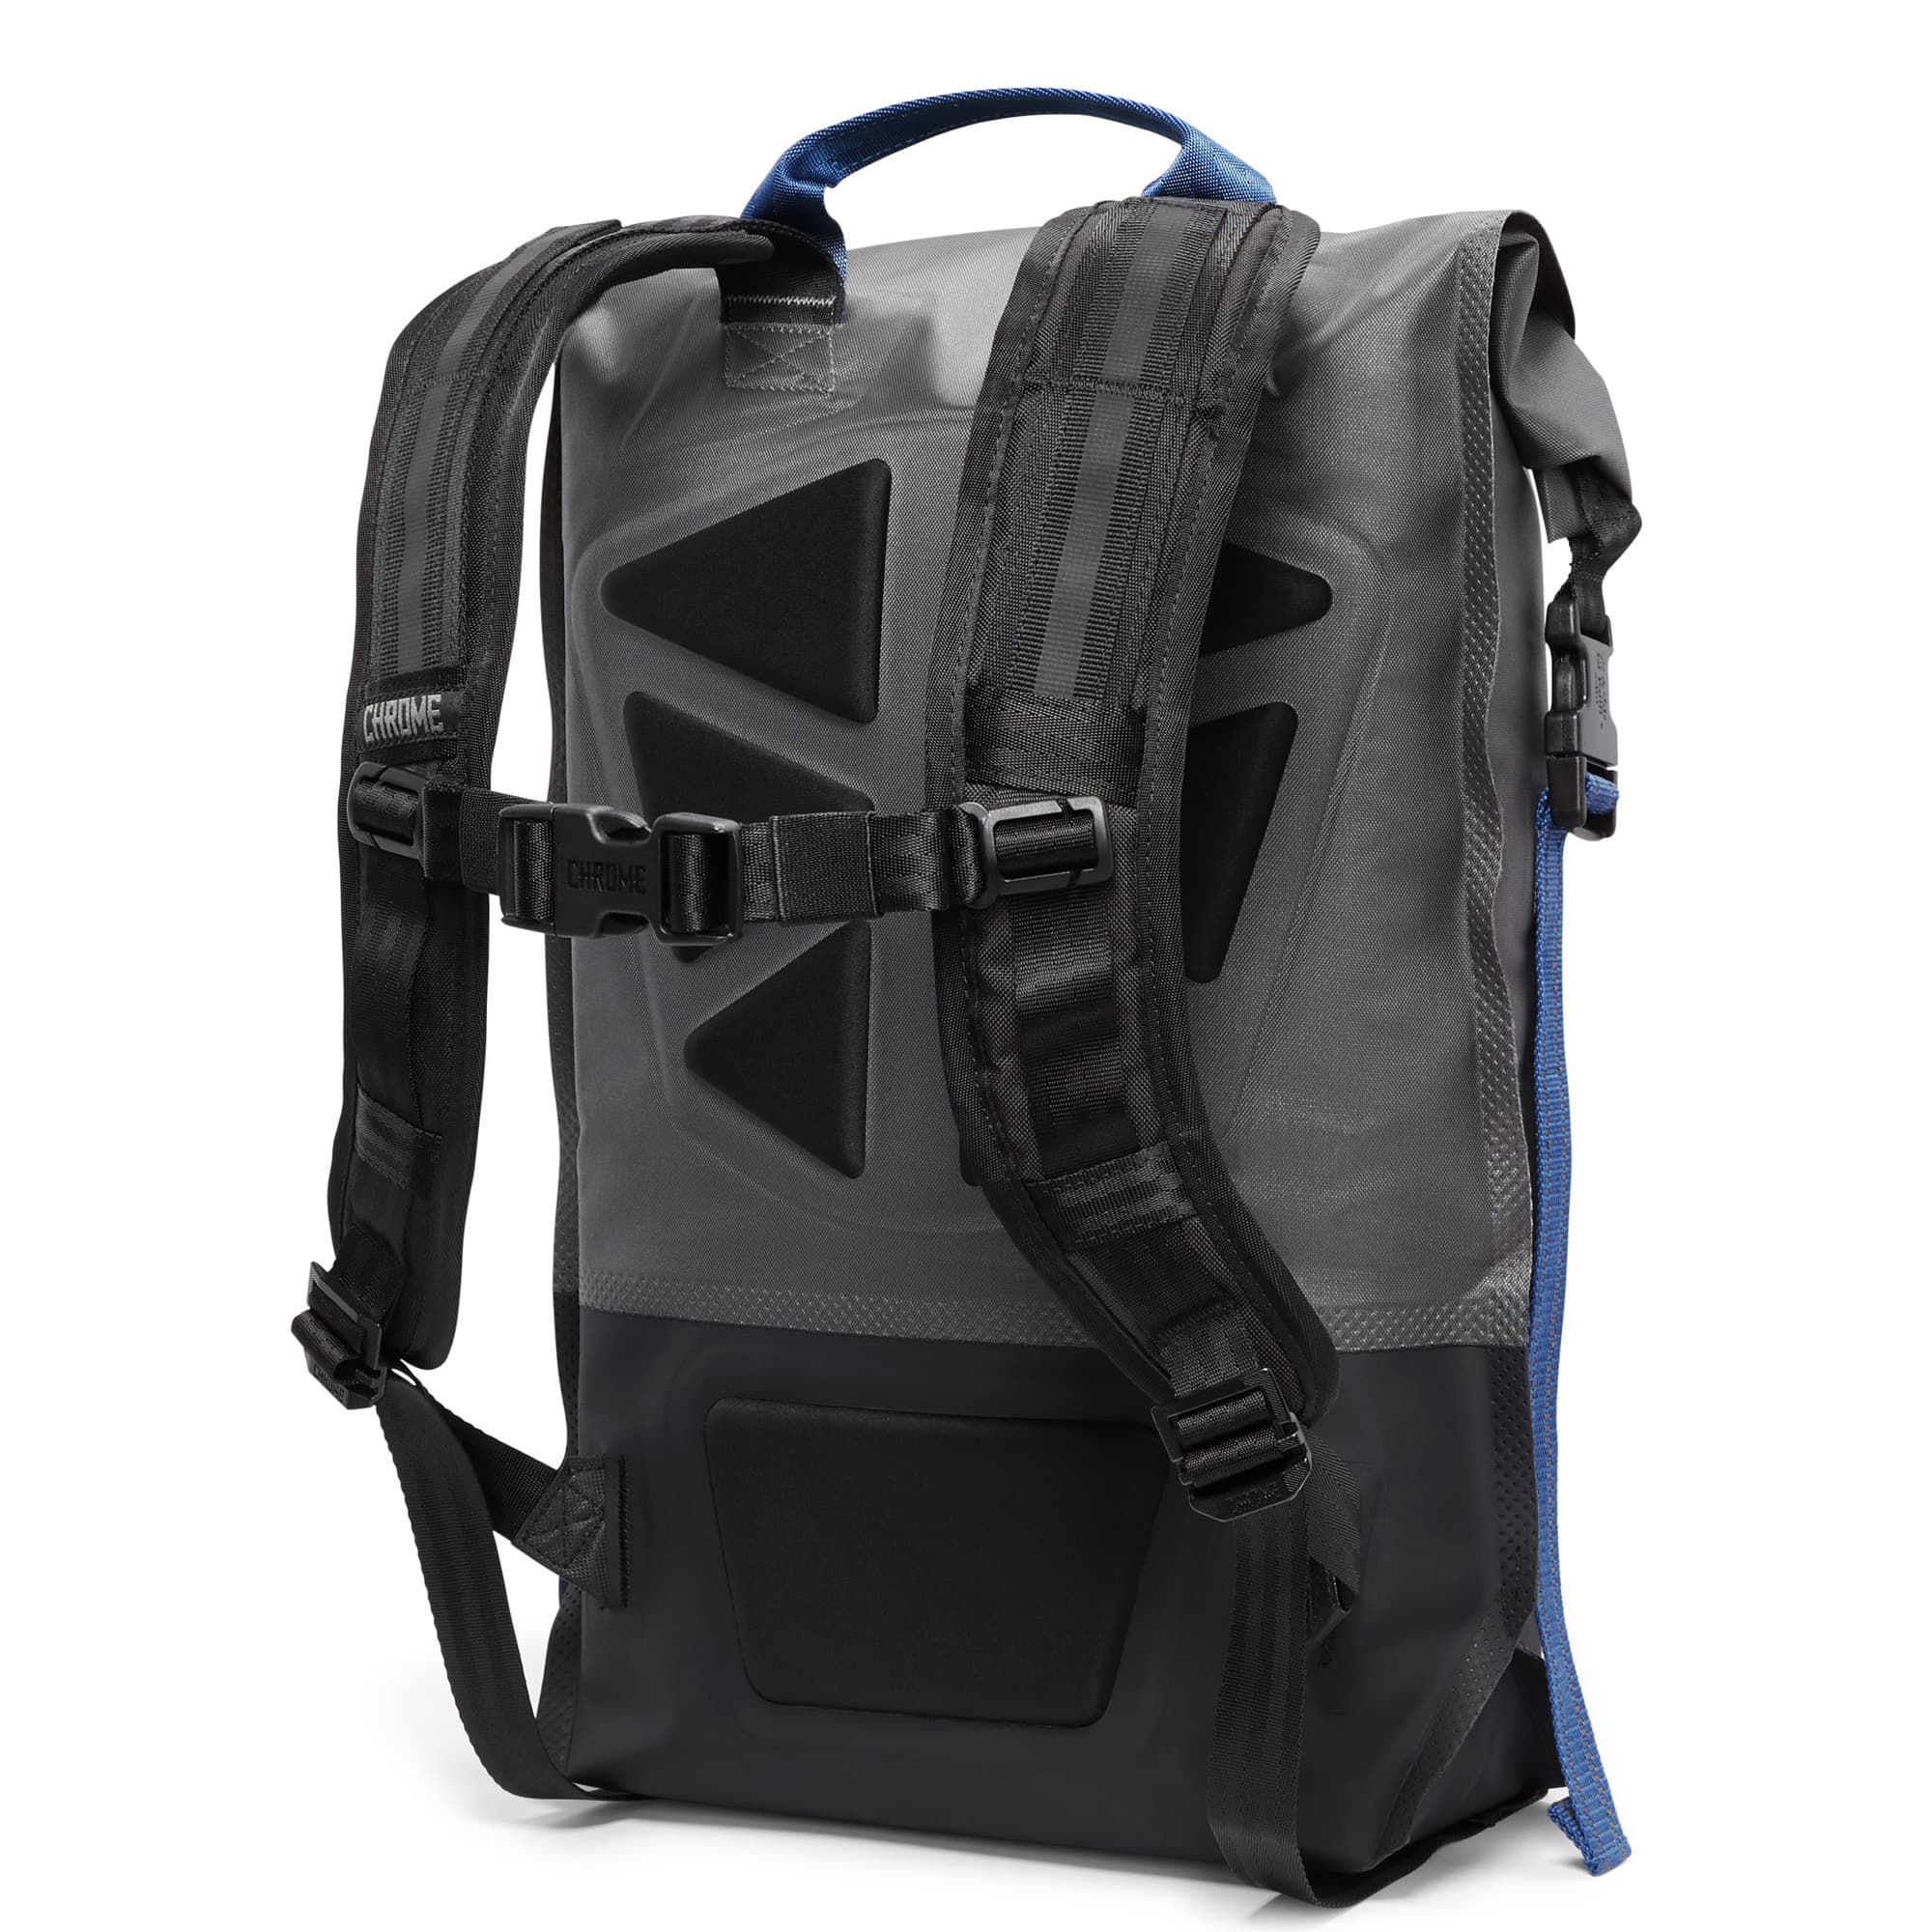 Waterproof 20L highly reflective backpack in grey harness detail #color_fog